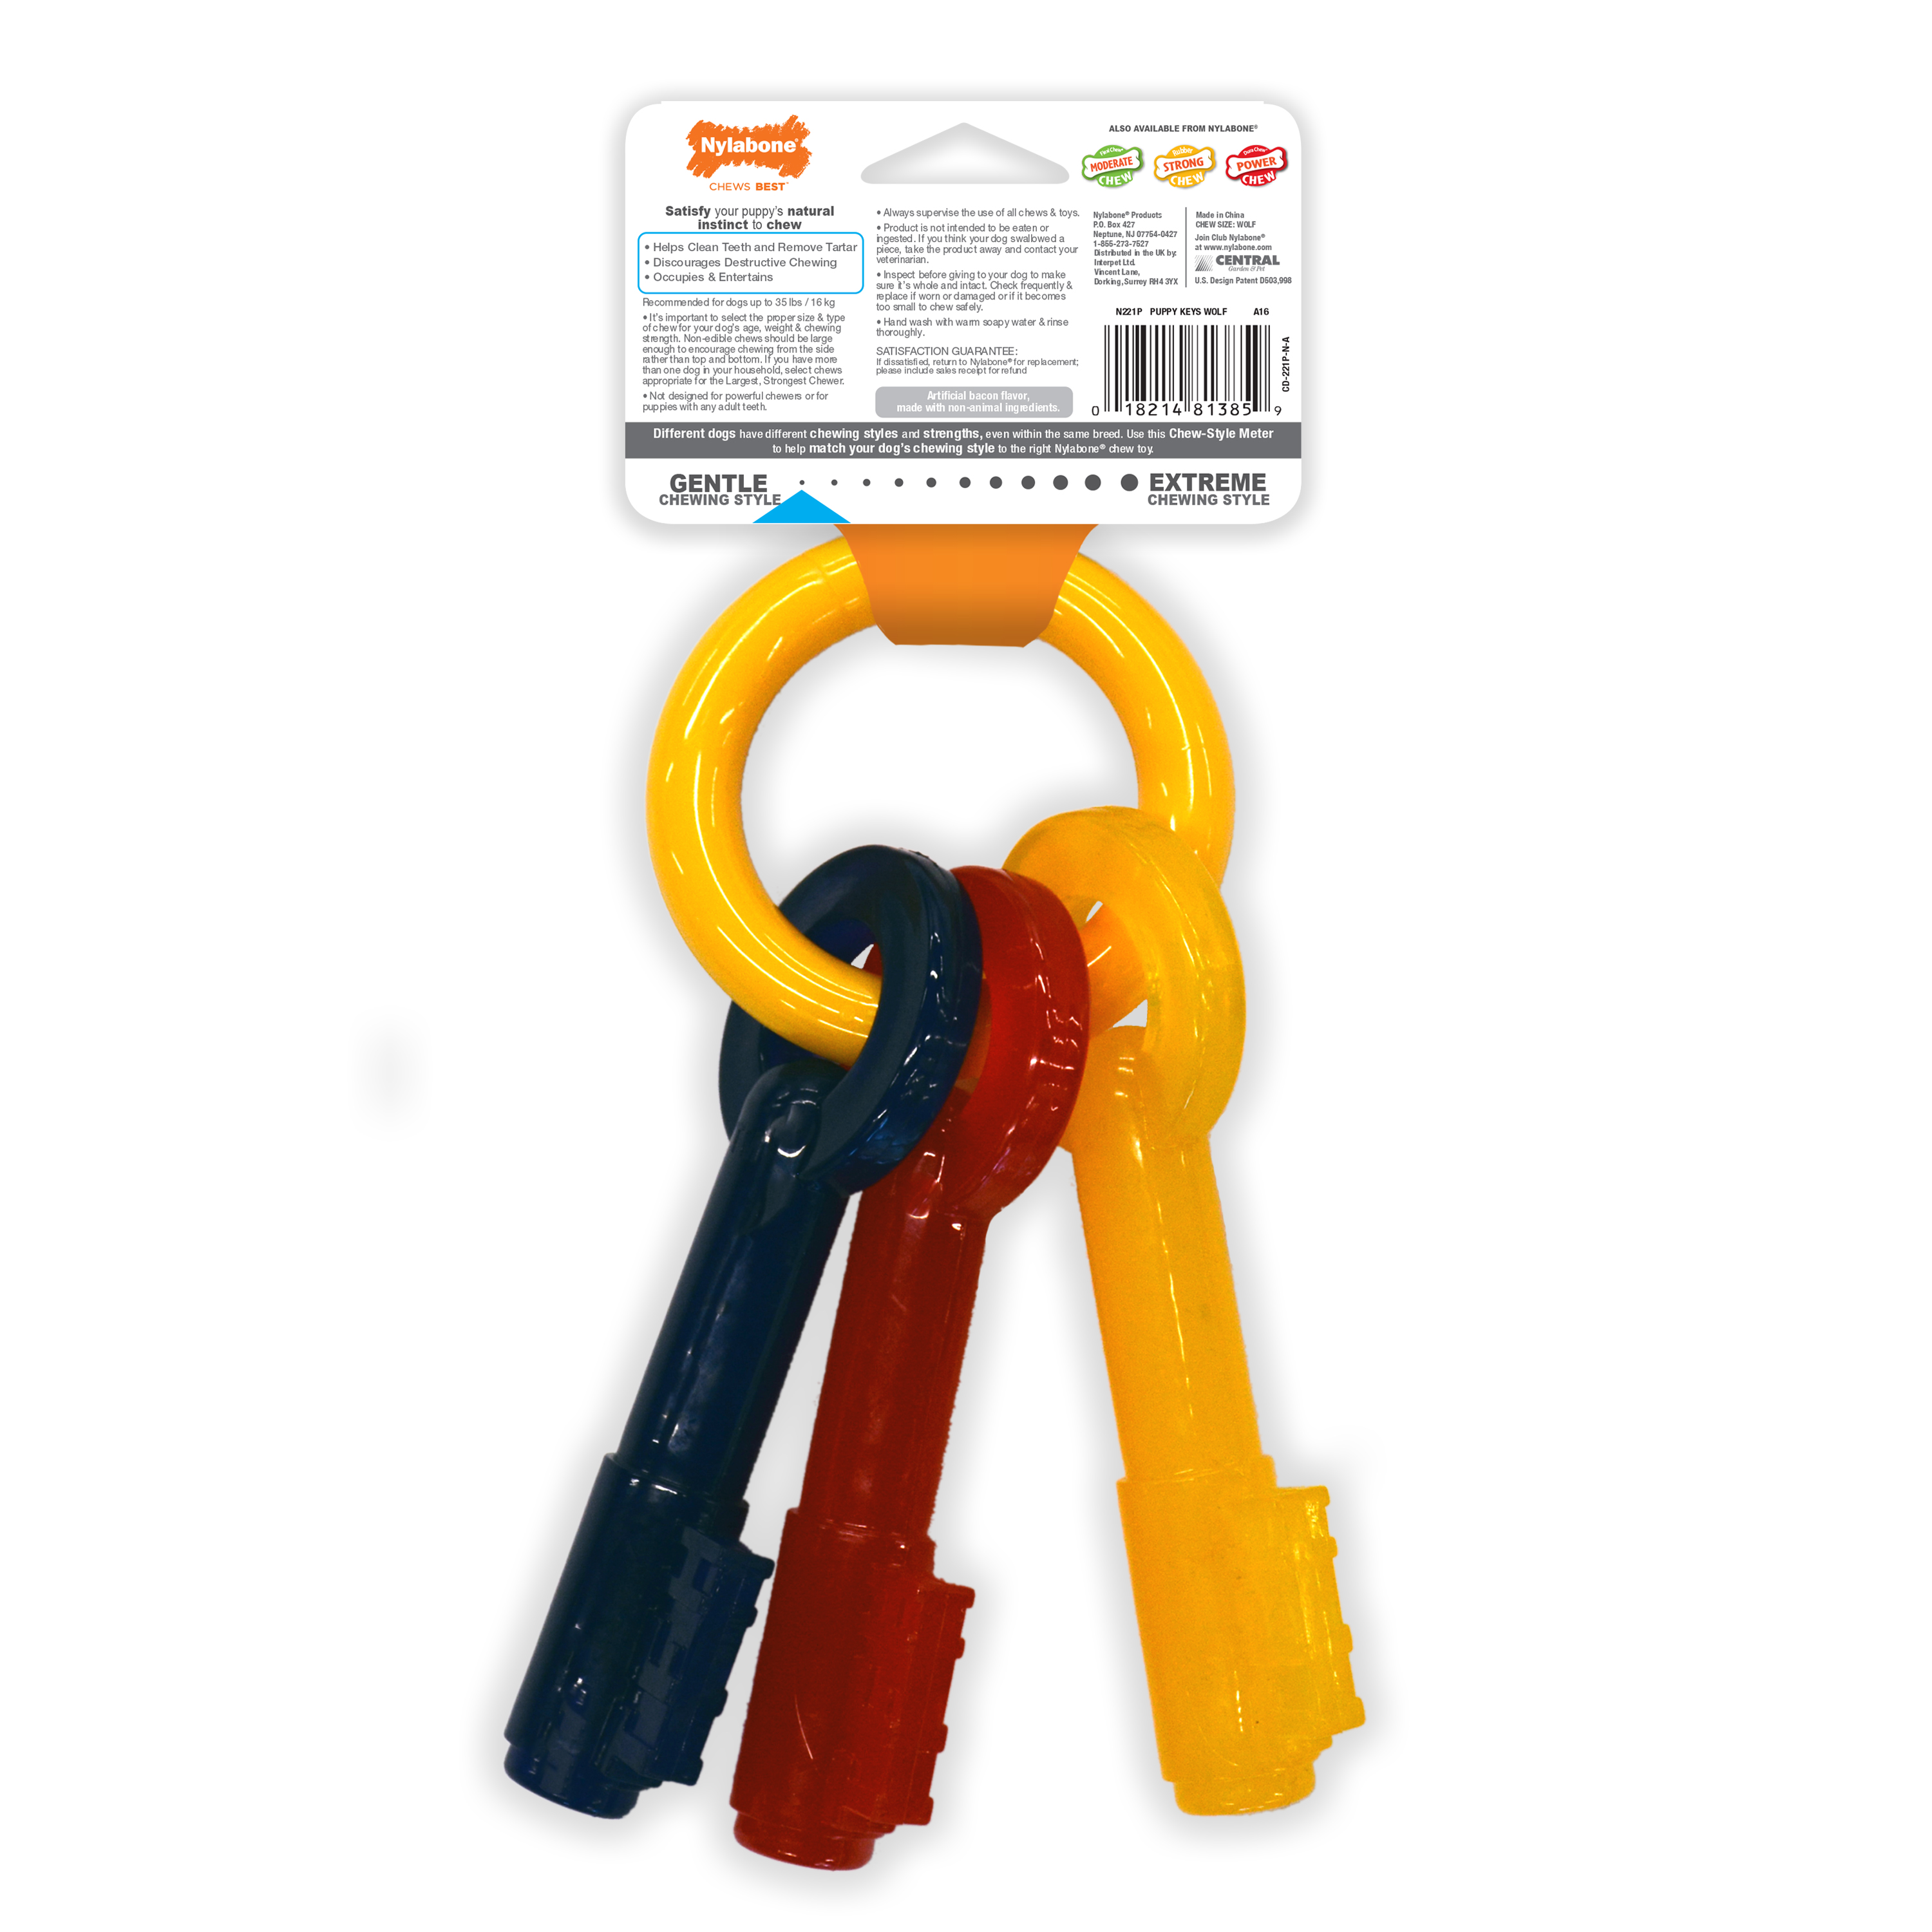 Nylabone Just for Puppies Teething Chew Toy Keys Bacon Medium/Wolf (1 Count) - image 4 of 7